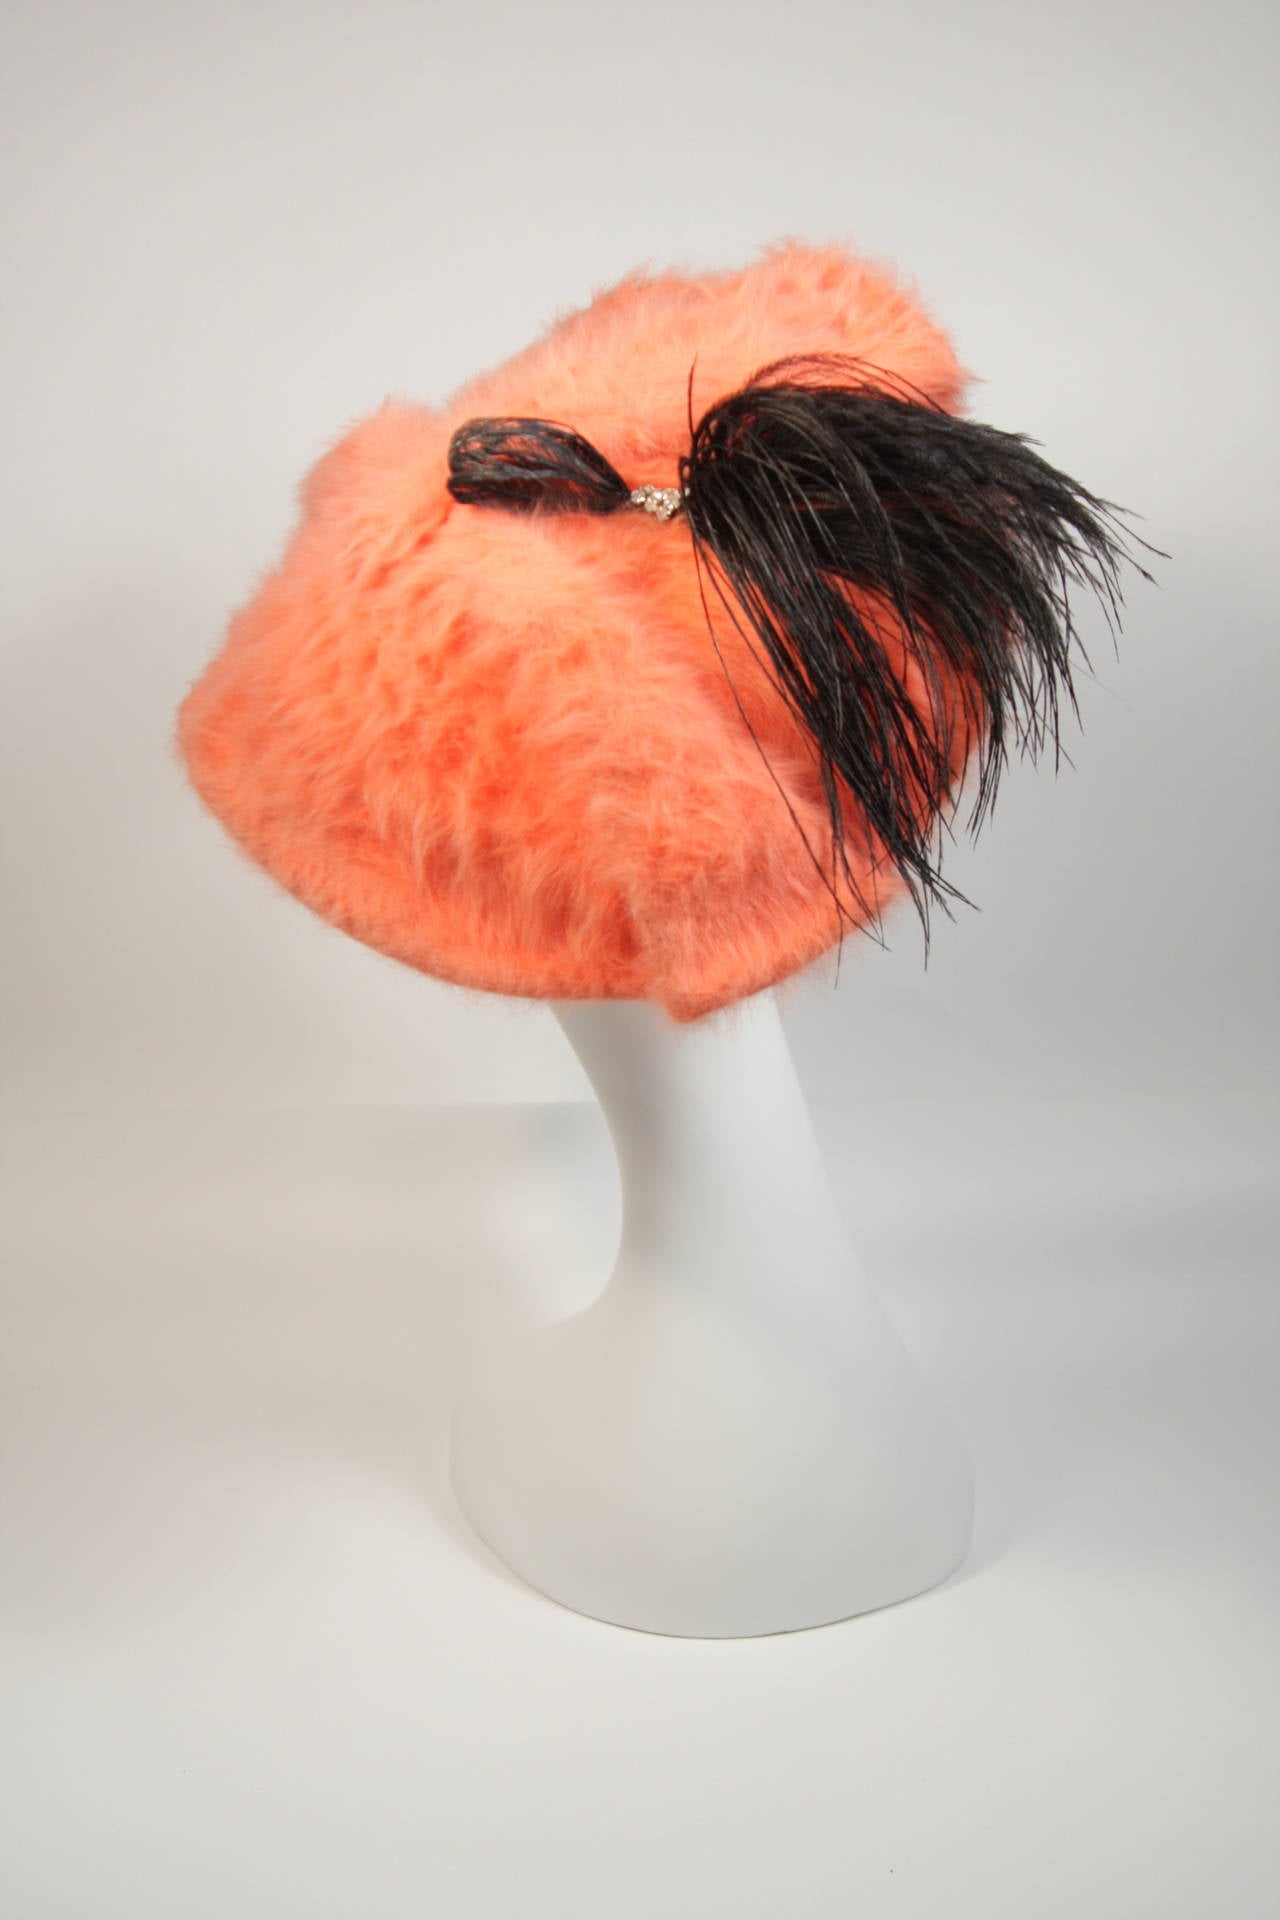 This Esther hat is composed of a bright orange fur and features a black feather with rhinestone detail. In excellent vintage condition, there is some slight discoloration from dust (will likely come out with cleaning). A burst of vibrancy and